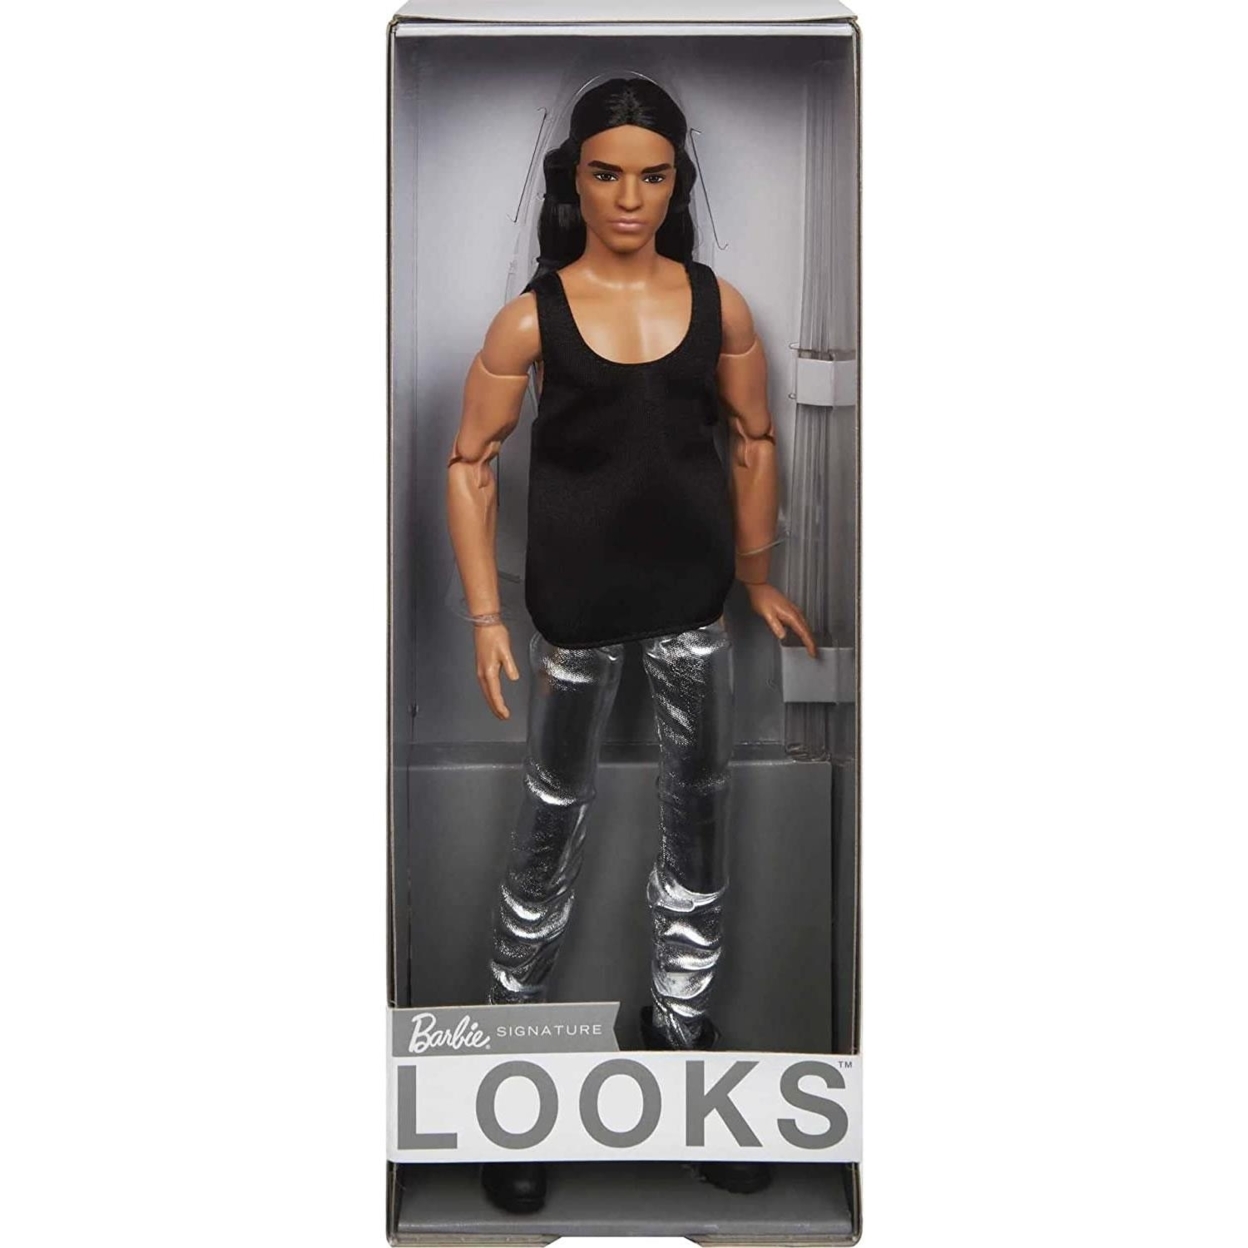 Barbie Looks Collectible Ken Doll with Long Brown Hair & Metallic Silvery Pants - image 1 of 7